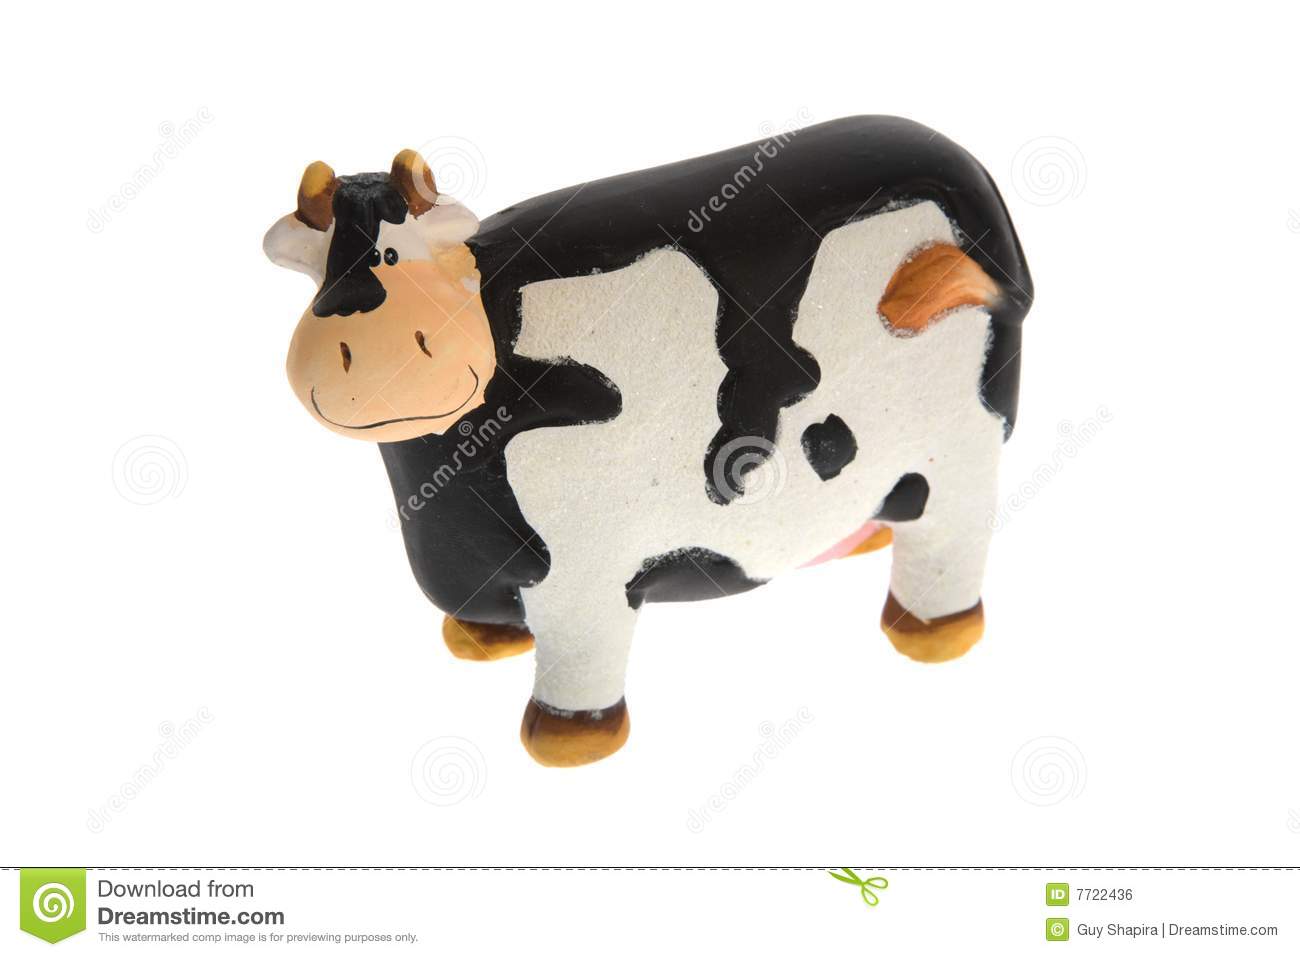 Crazy Toy Cow Royalty Free Stock Image   Image  7722436